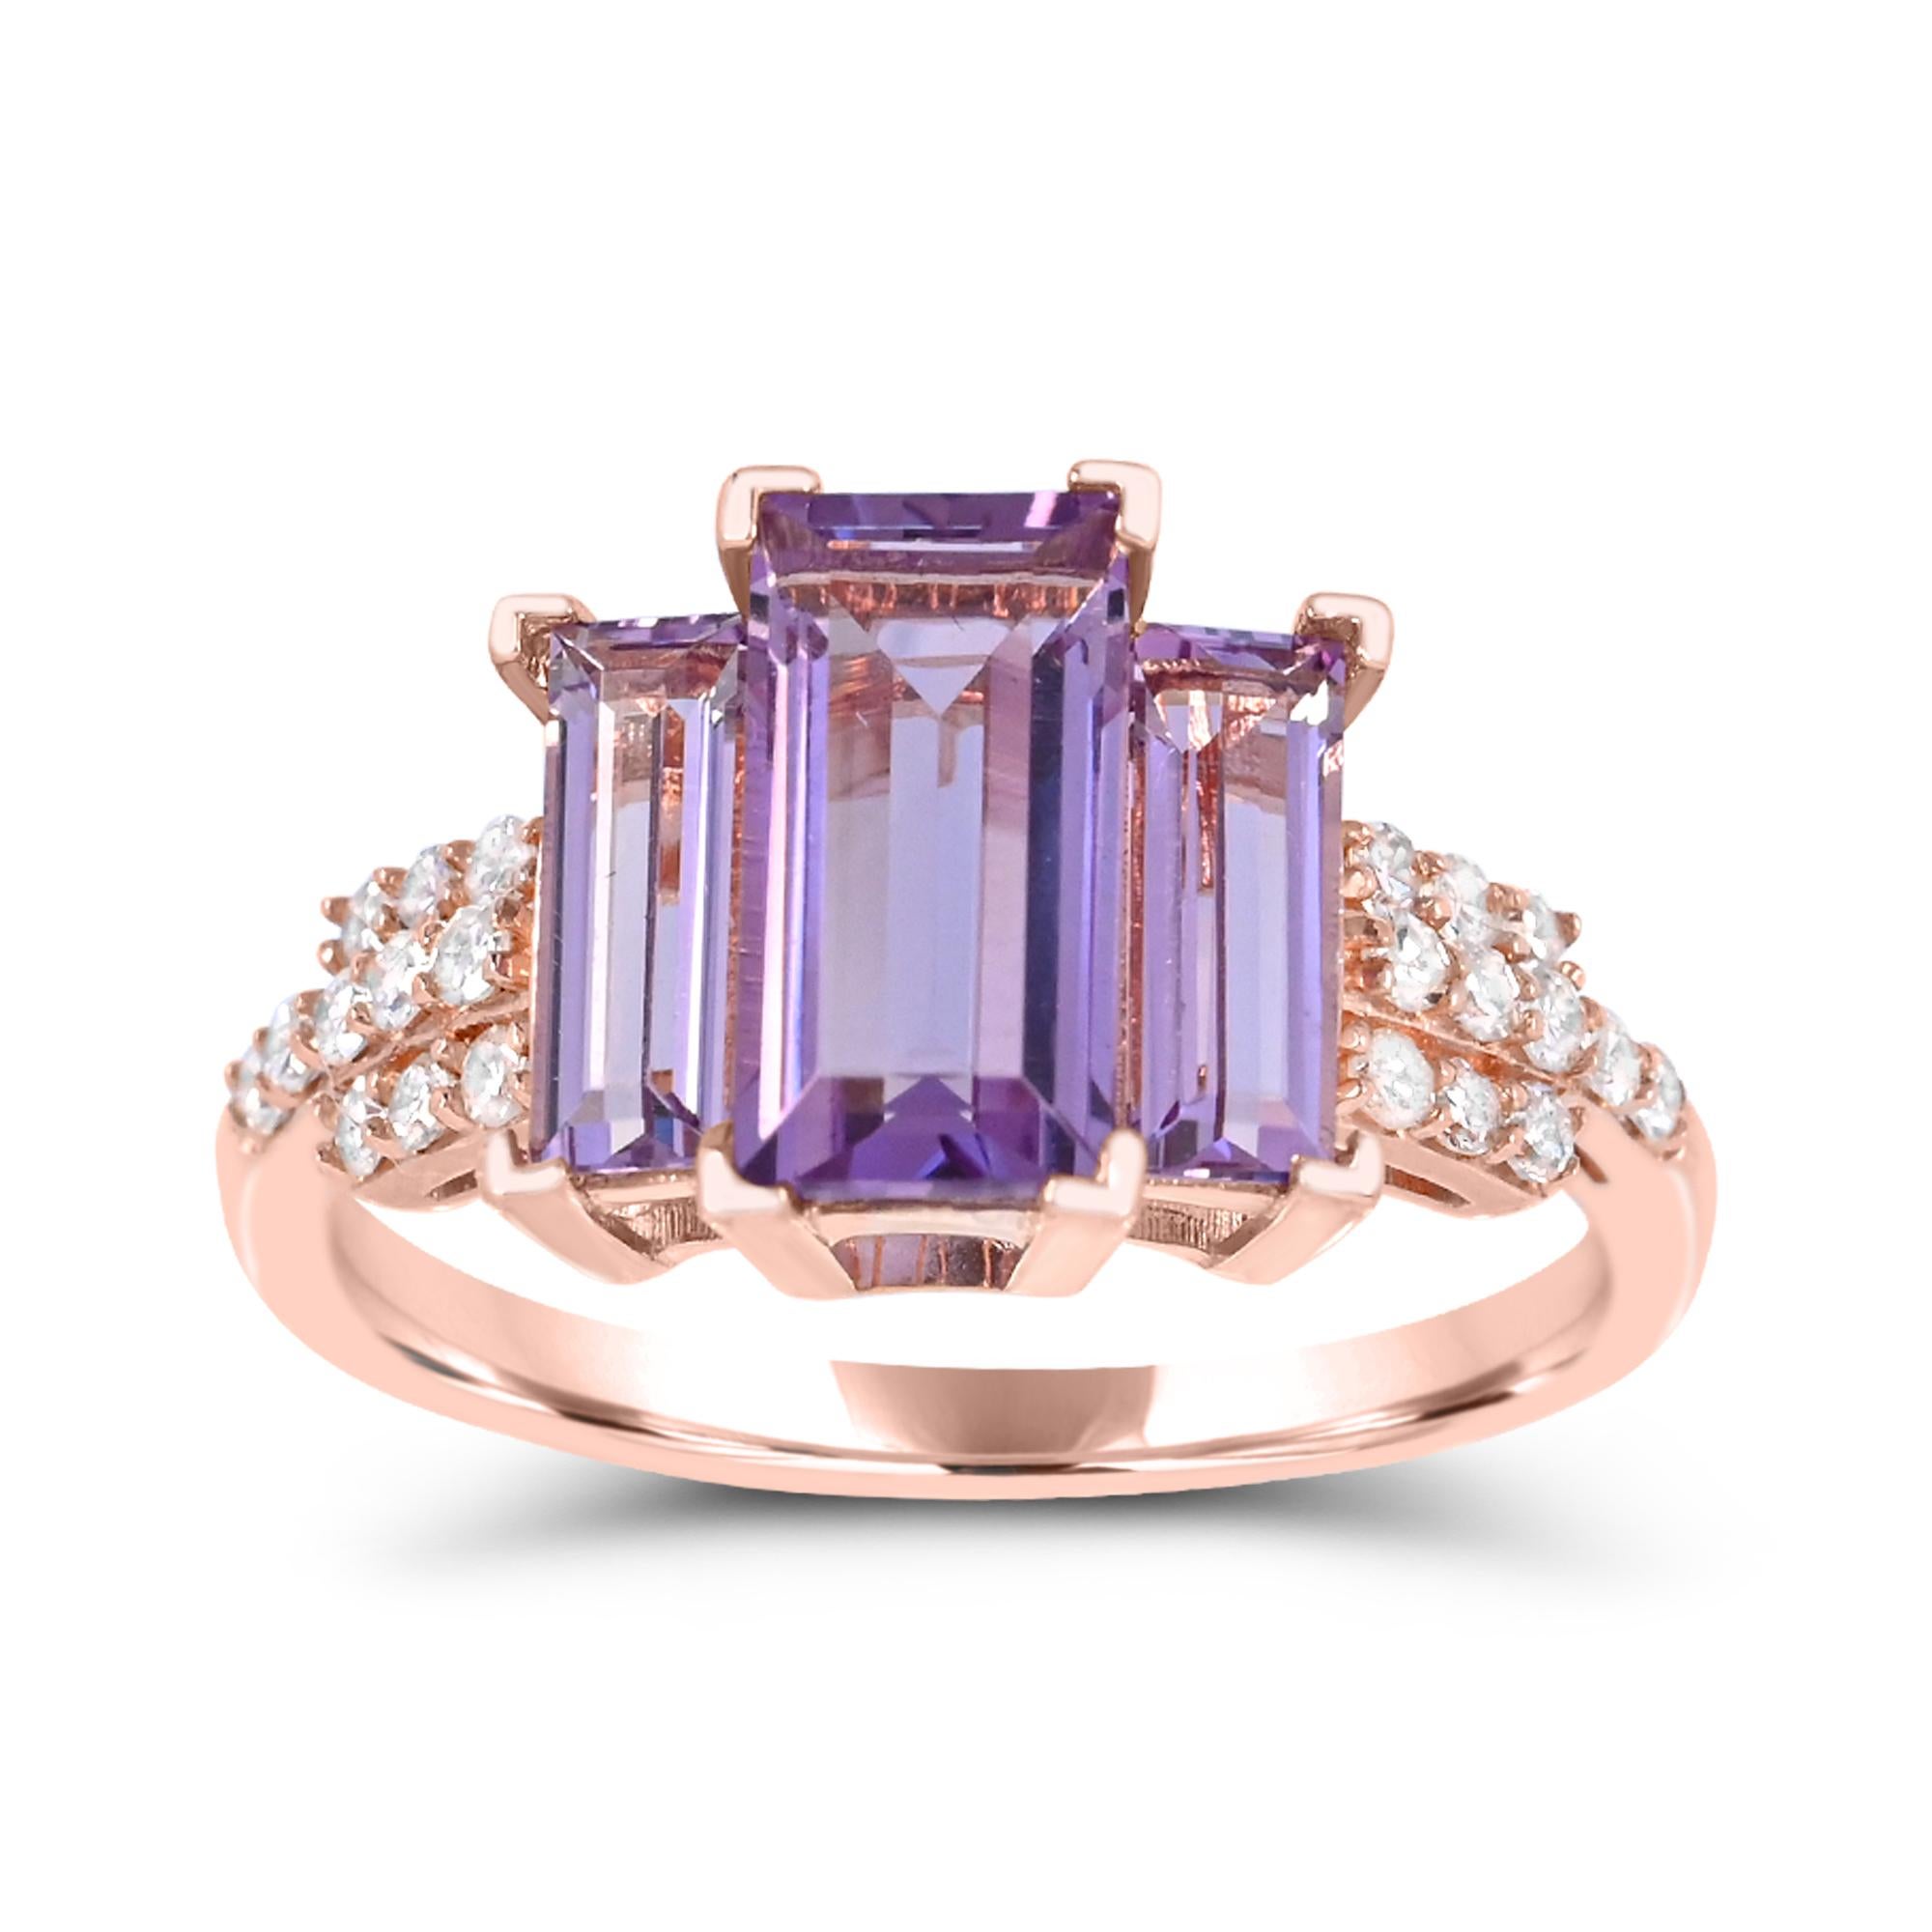 This is a simple and elegant designed three-stone ring with royal purple temperament. This lady size 7 ring features three amethysts accented by 0.22ct single cut round diamonds. 

Metal: 14K Rose Gold over Sterling Silver
Center Stones: Baguette